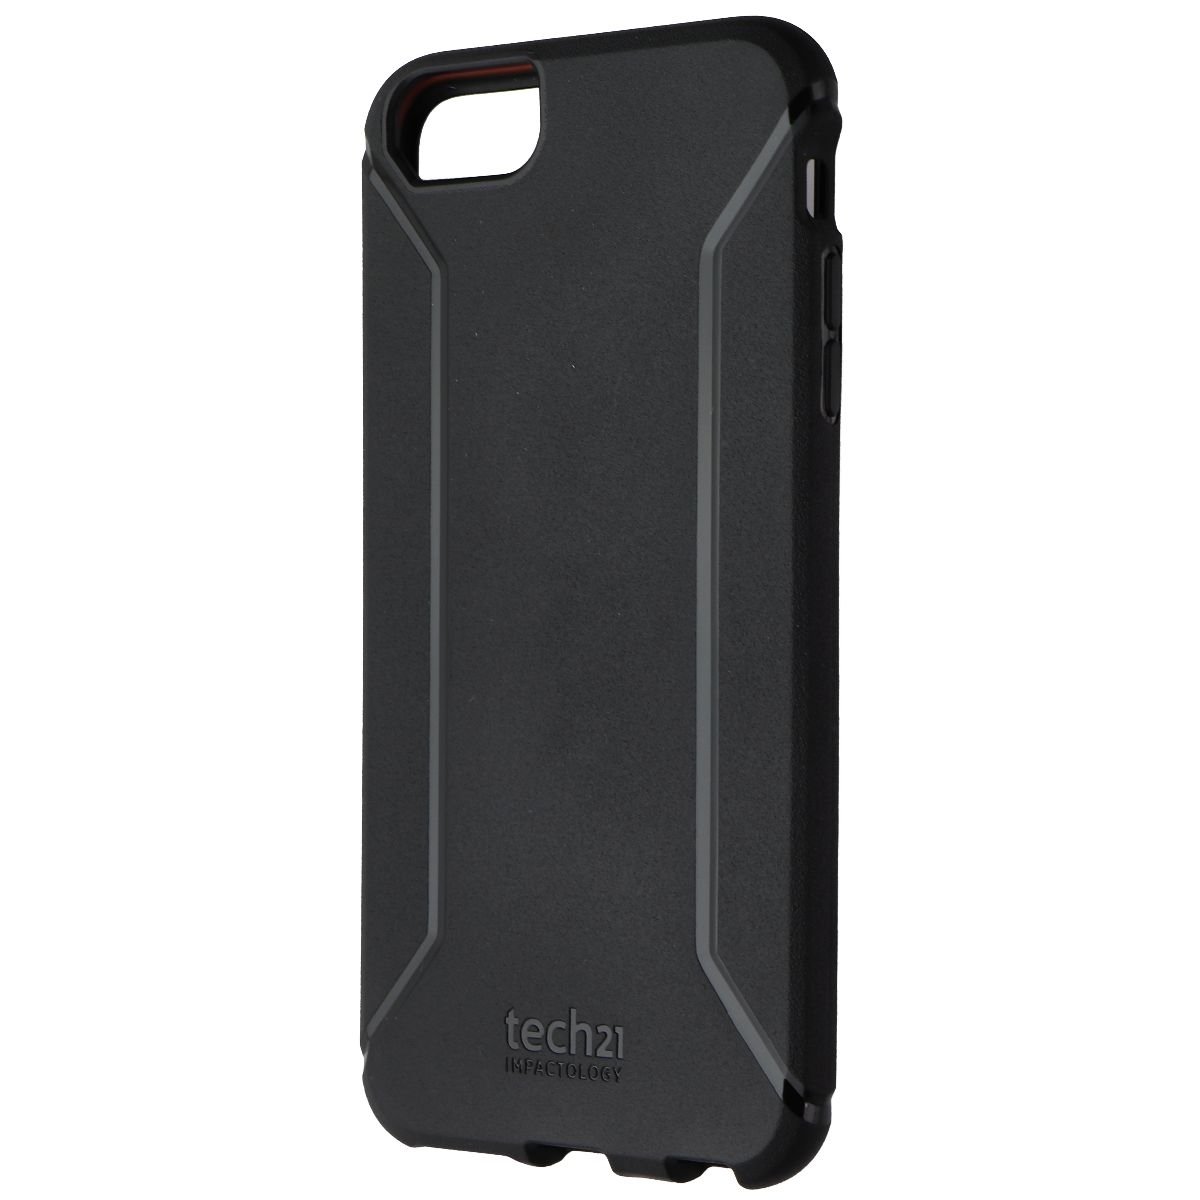 Tech21 Classic Tactical Series Case For Apple IPhone 6 Plus - Black (Refurbished)